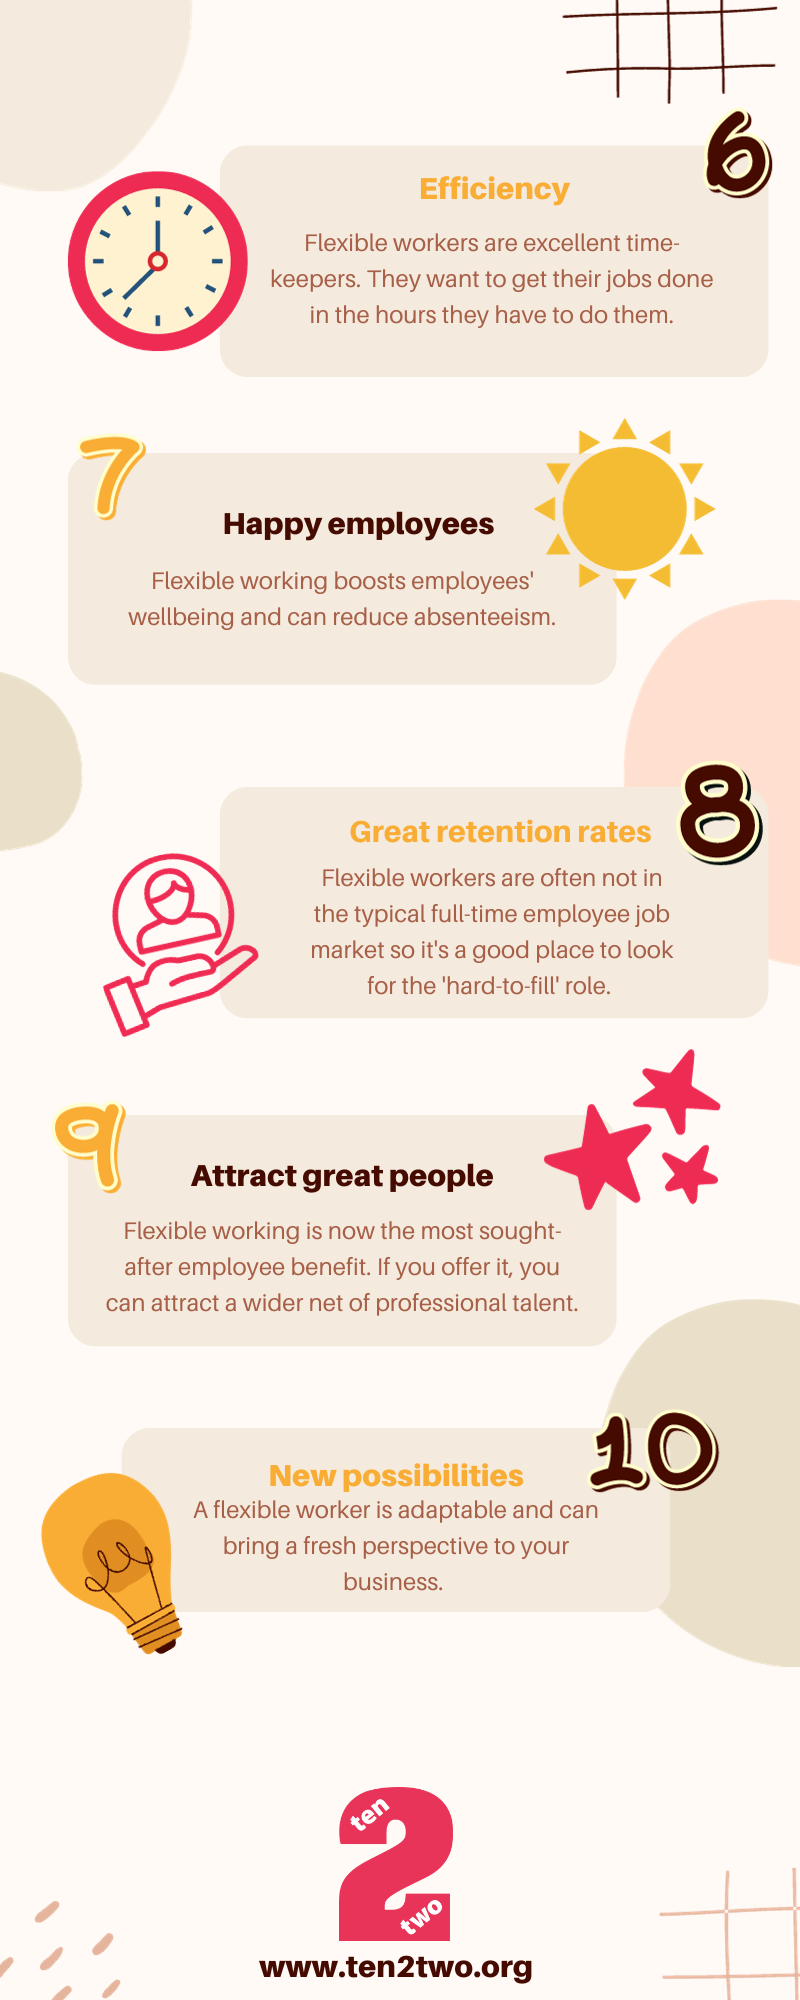 PAGE 2 - LINKED TO WEBSITE-DO NOT EDIT INFOGRAPHIC - 10 reasons why FW is great for business